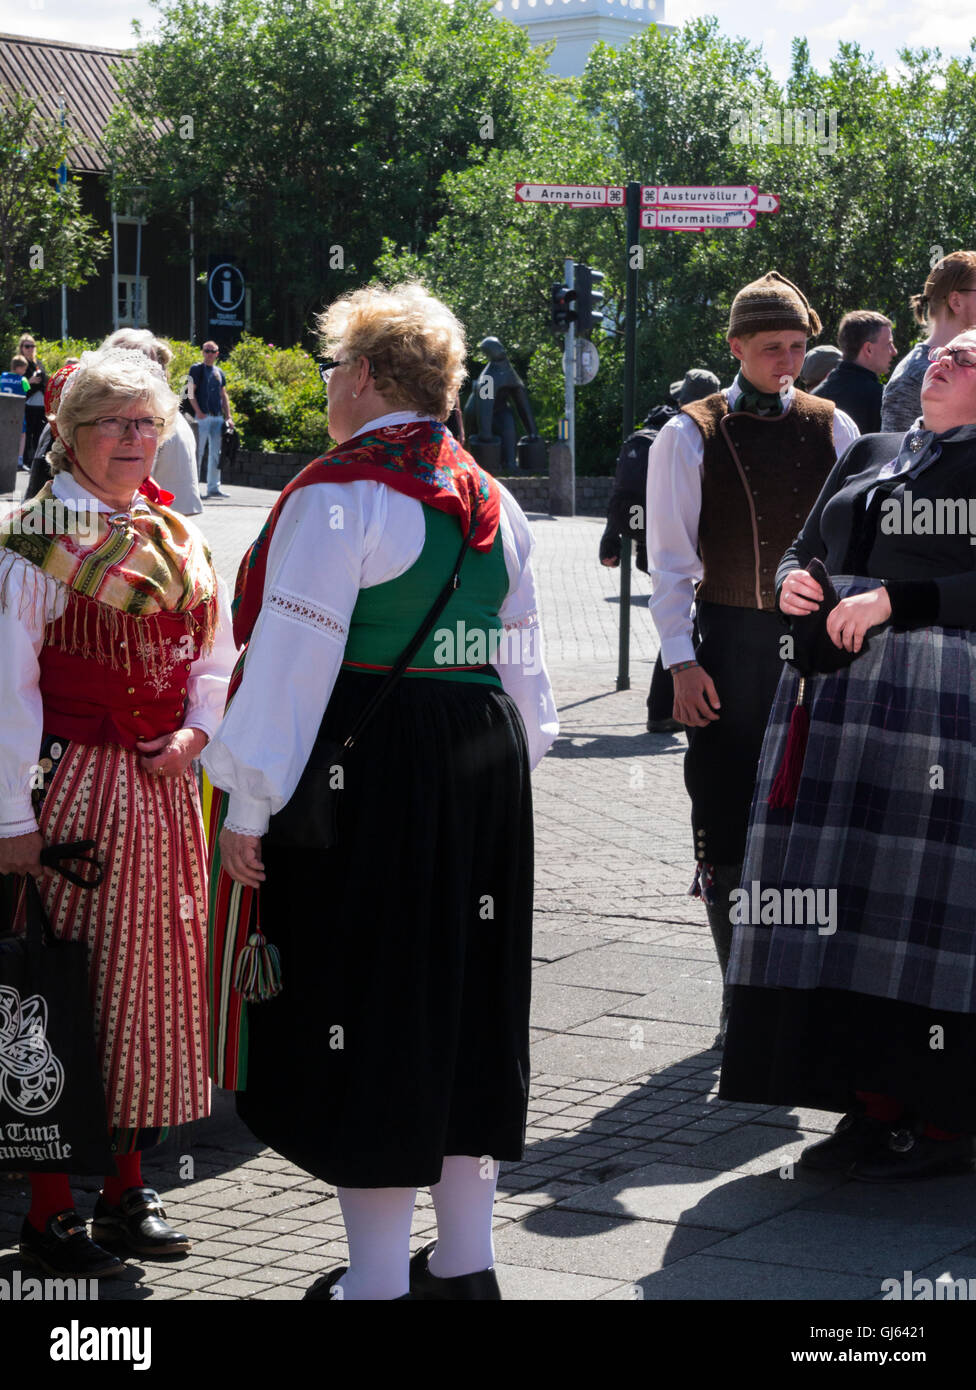 Group Icelandic people in National folk dress Reykjavik Iceland's capital city on a lovely July summers day vertical orientation Stock Photo